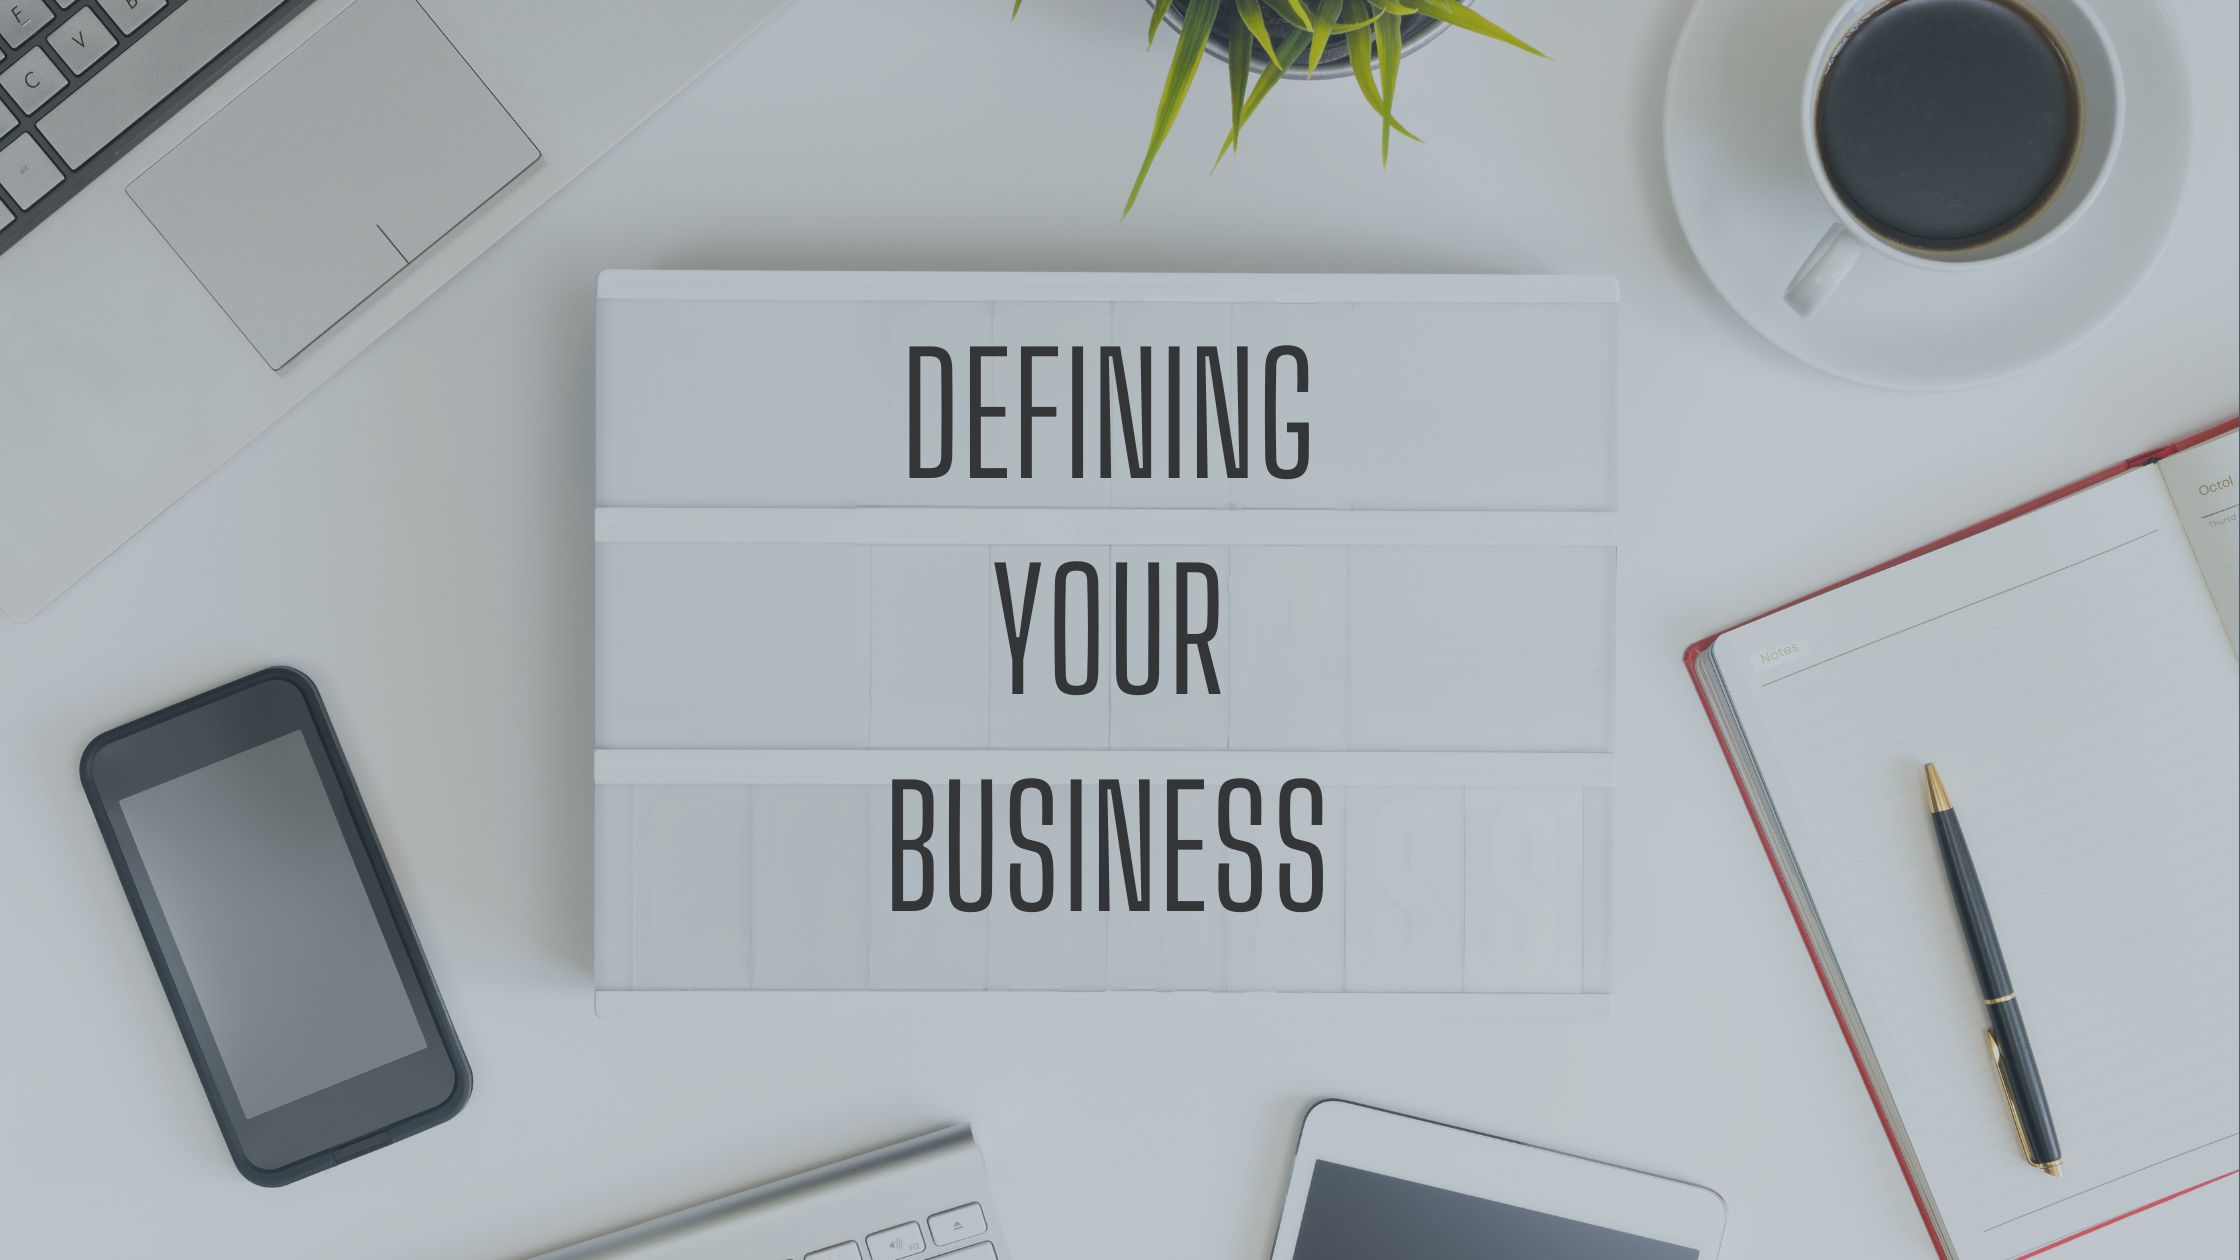 DEFINING YOUR BUSINESS